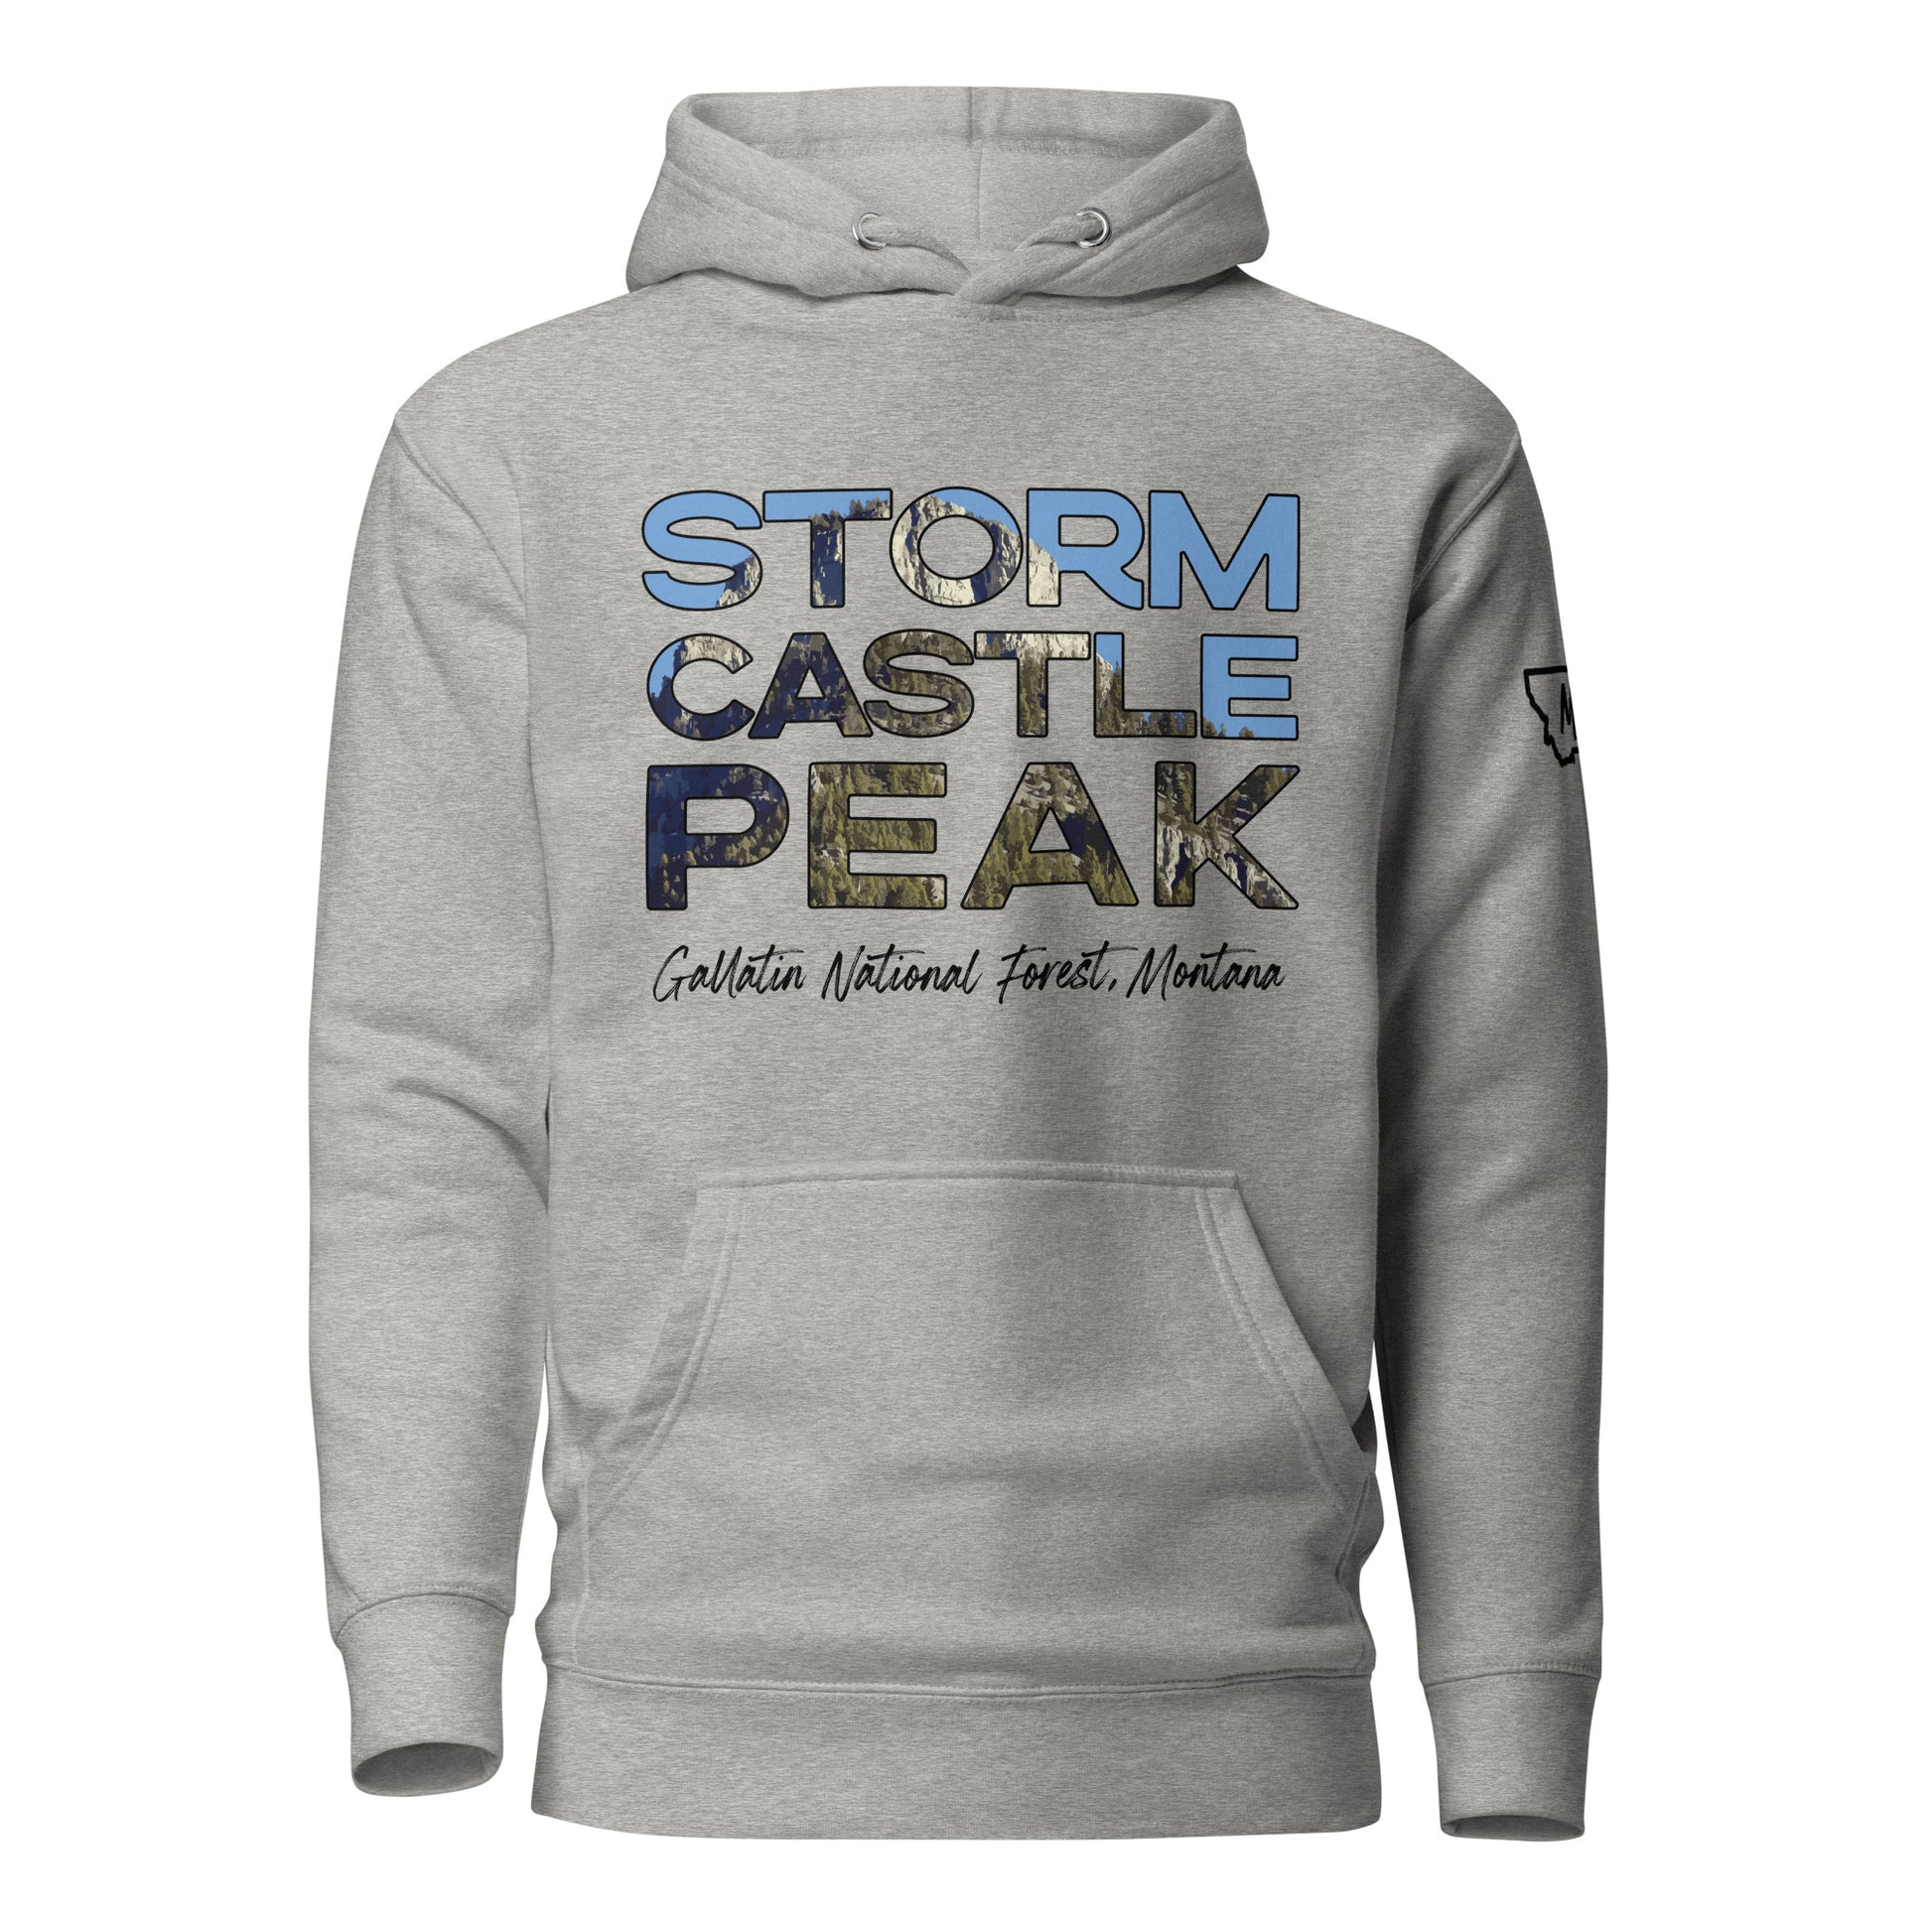 Front view of Storm Castle Peak in Custer Gallatin National Forest Montana Carbon Grey Hoodie from Park Attire